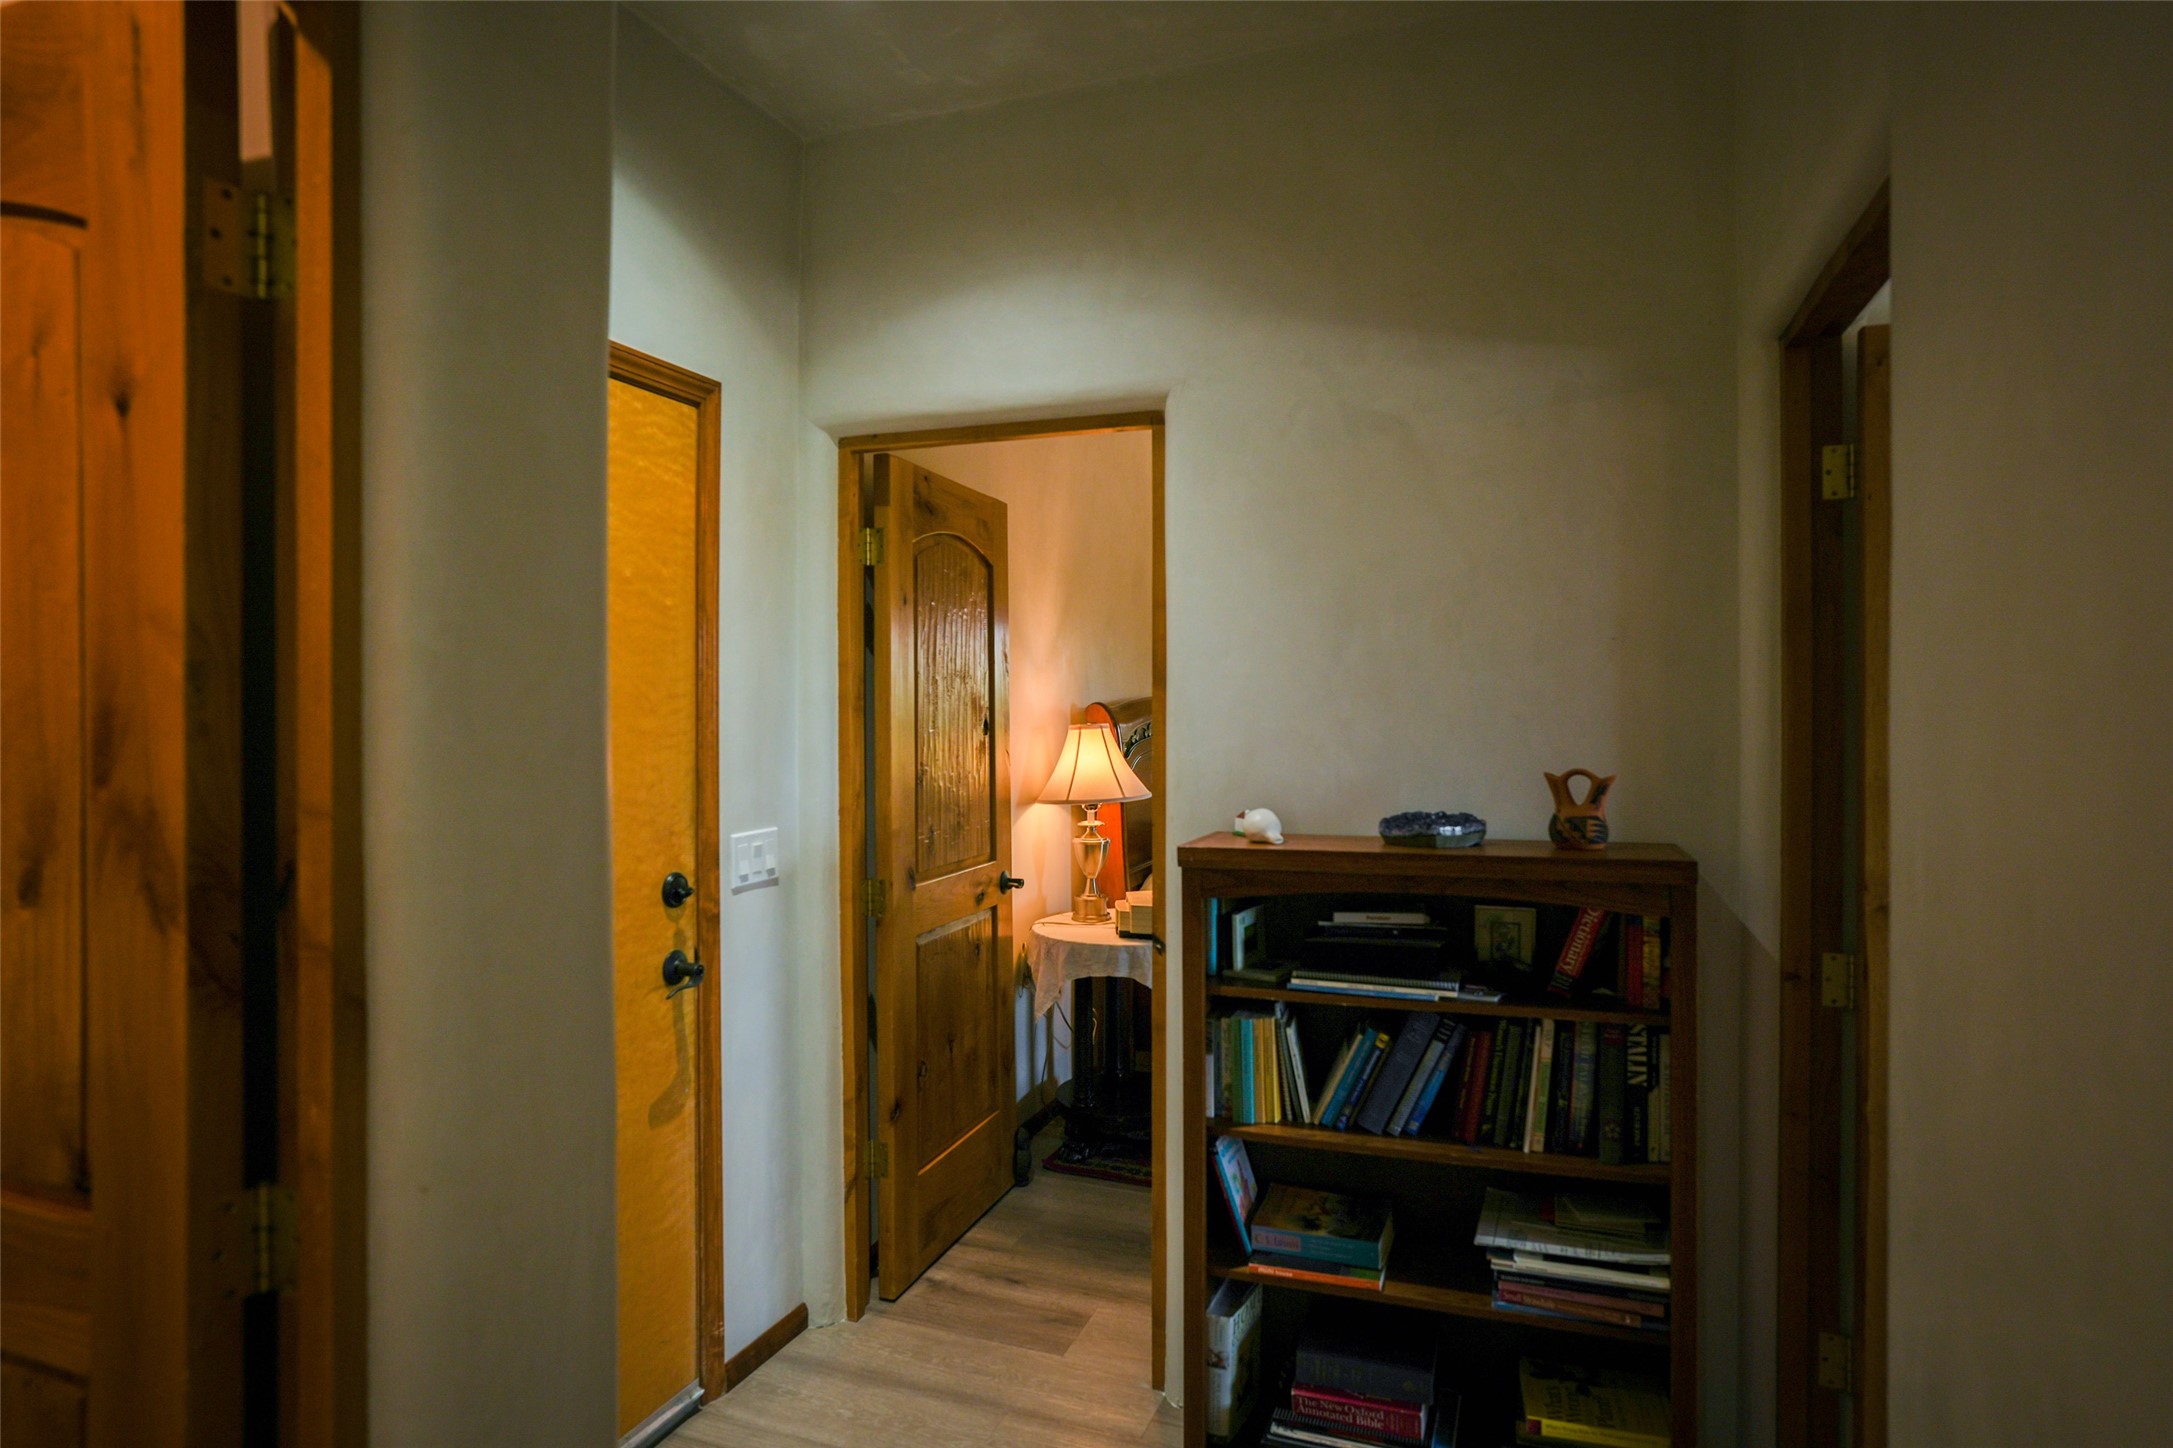 PATHWAY TO 2ND BEDROOM